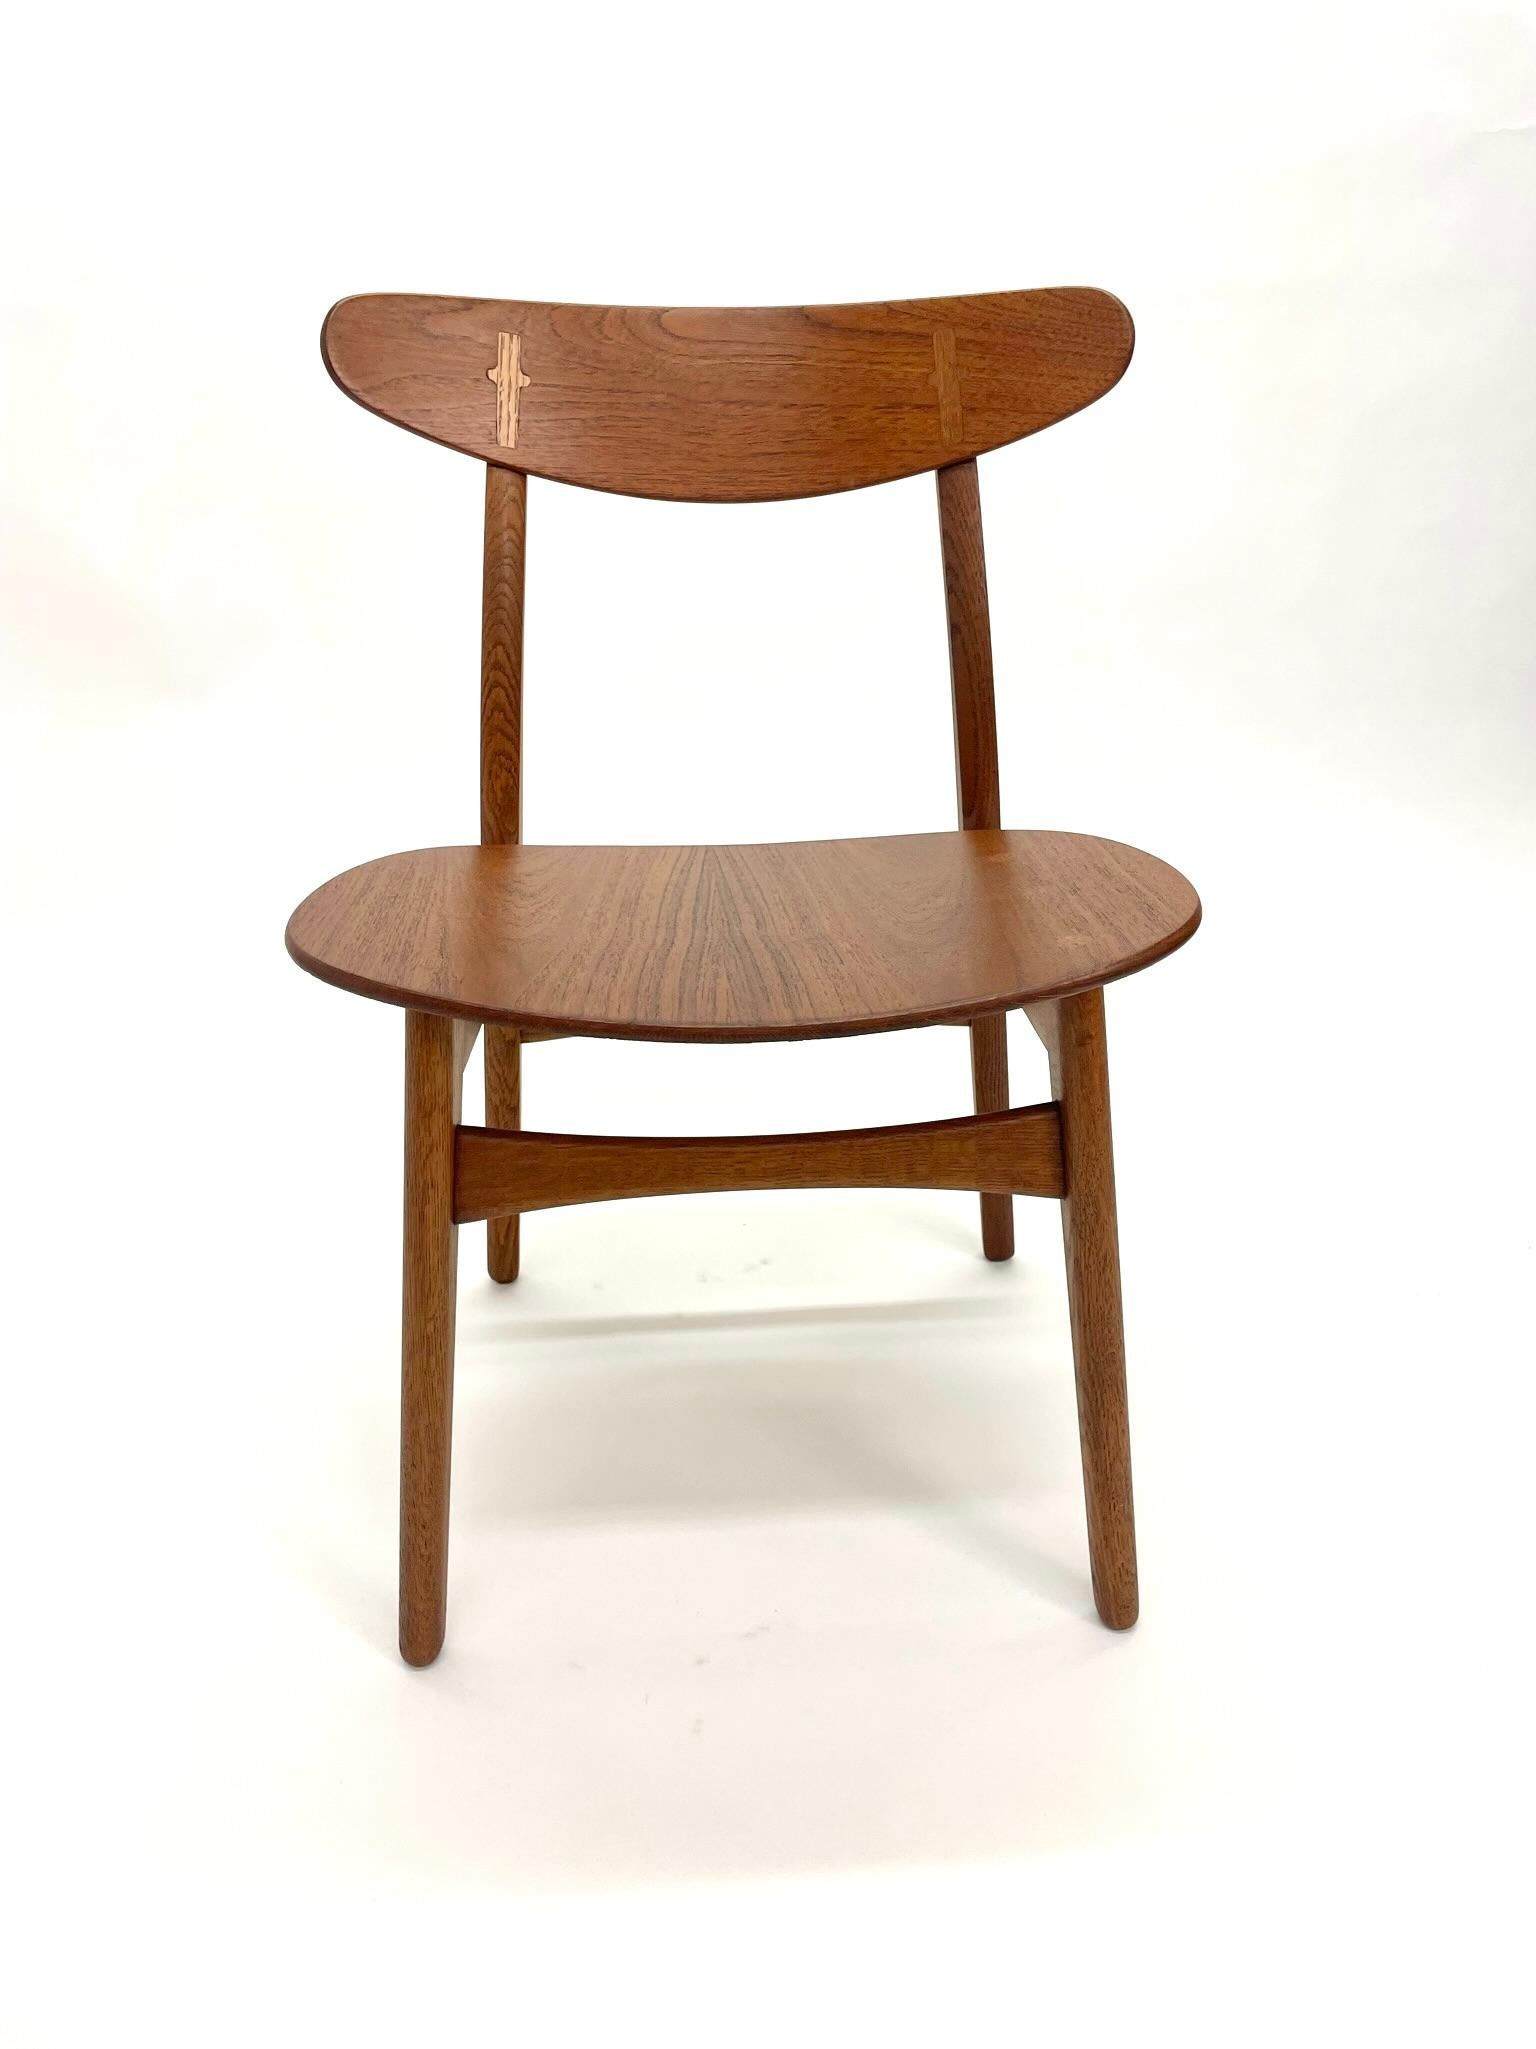 Rare set of Hans Wegner CH-30 dining chairs with wood seat. These chairs are made of Teak and Oak and feature Hans Wegner classic contrasting wood cross on the back of the chair as well contrasting wood on the seat. Pictures show the chairs before